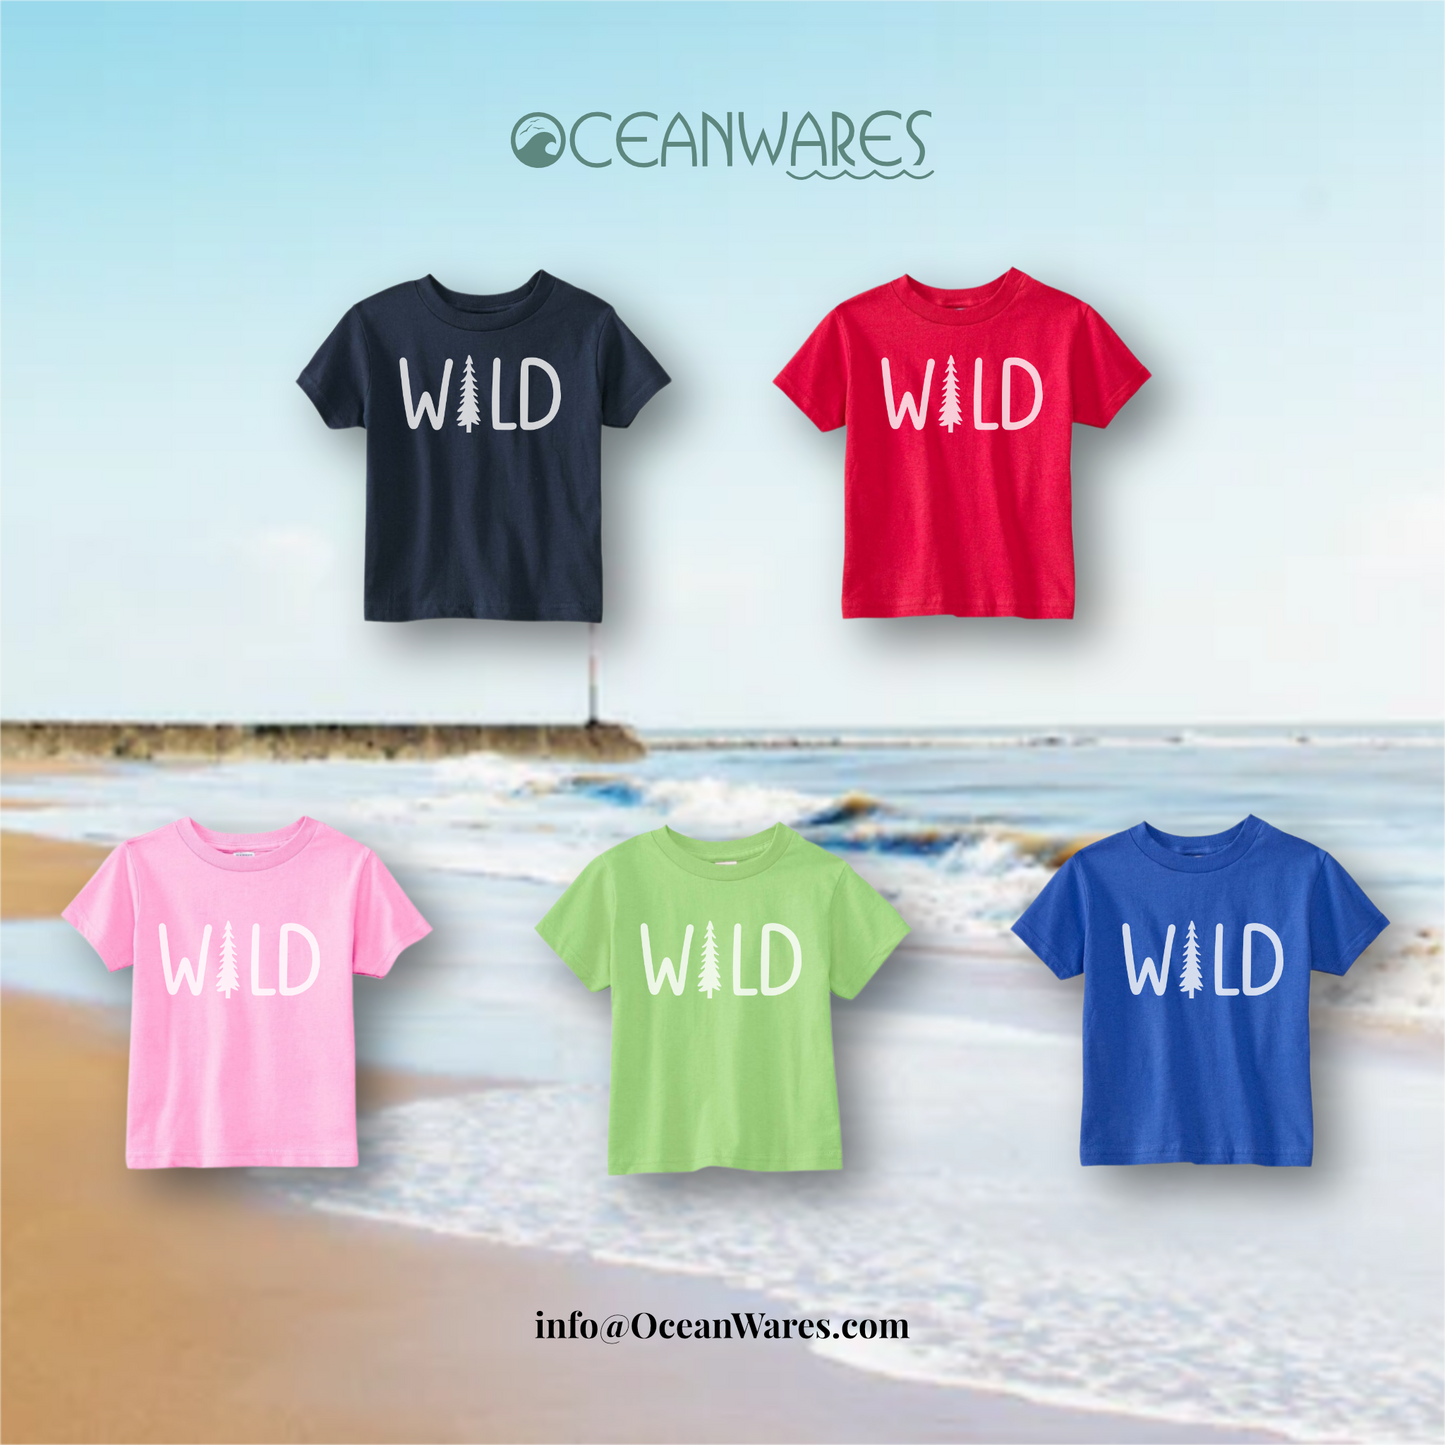 WILD Toddler Tee, Embrace the Wilderness,